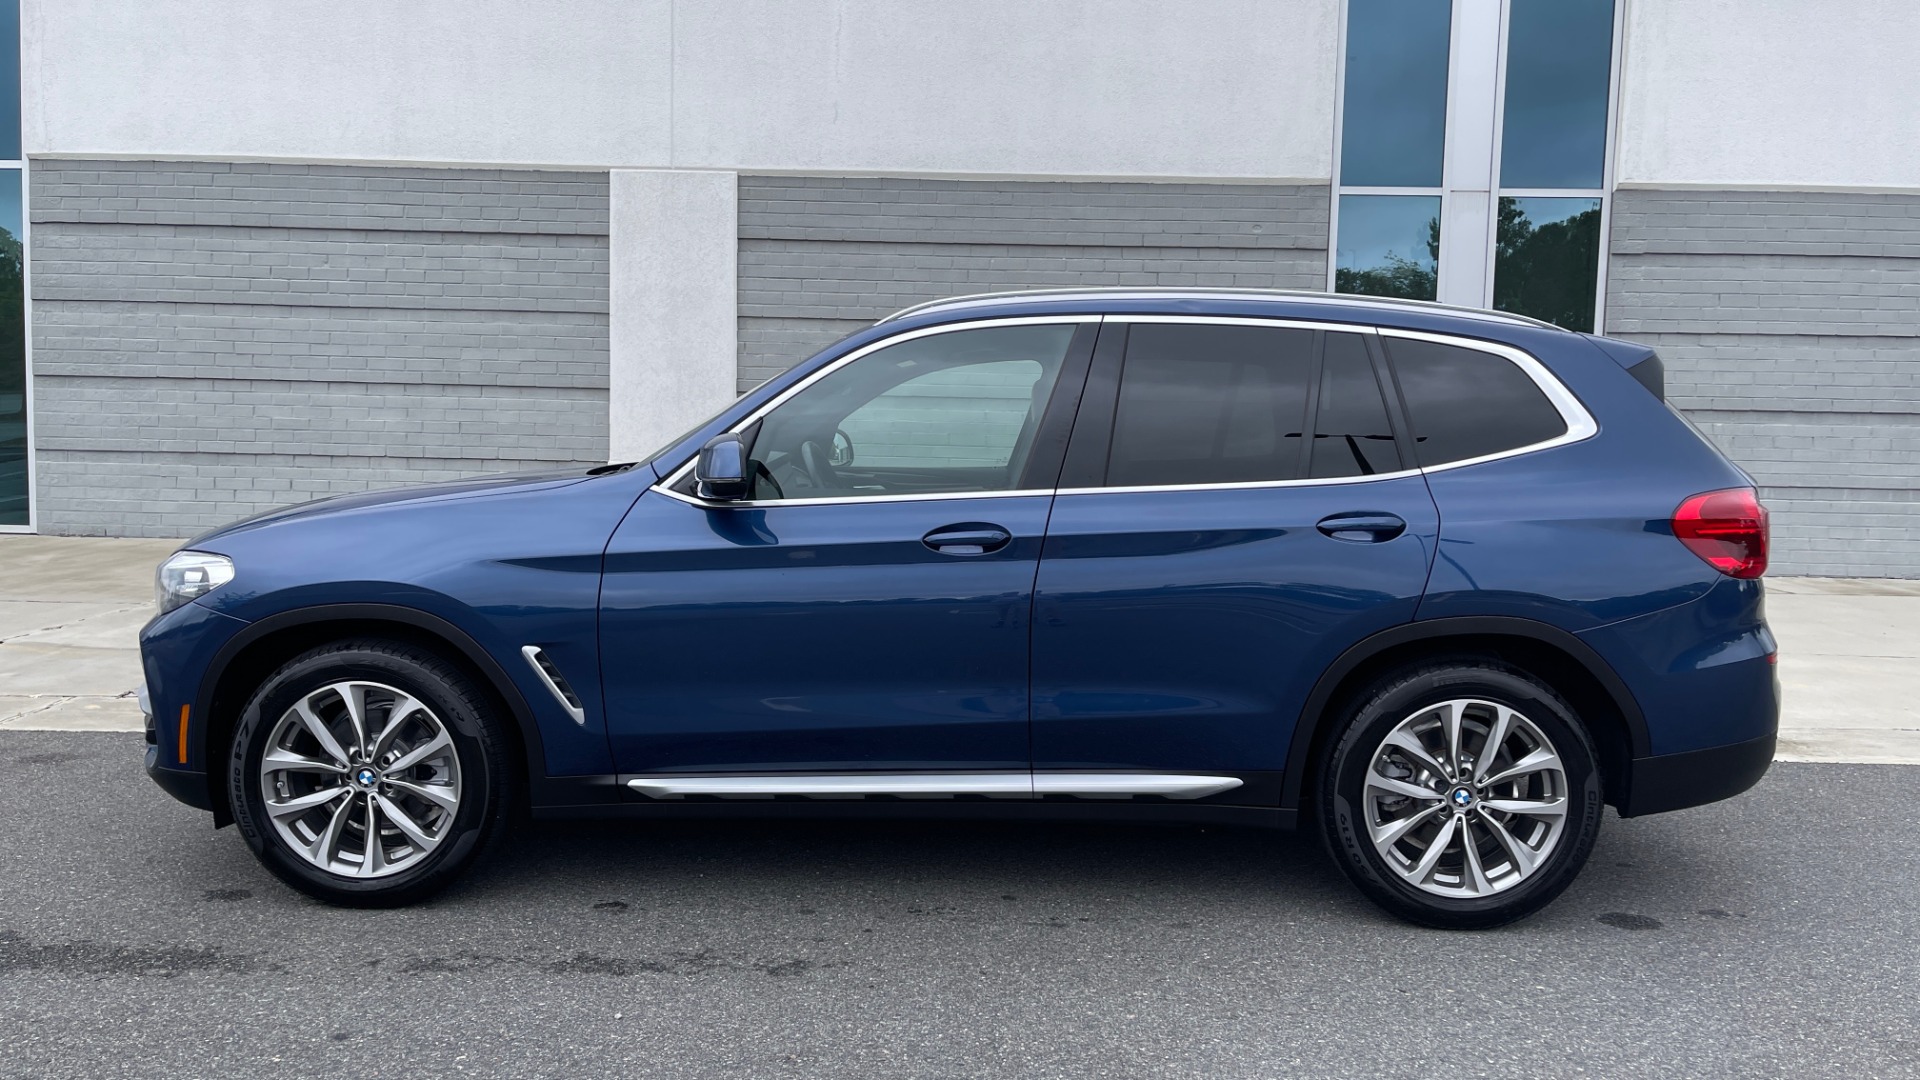 Used 2019 BMW X3 SDRIVE30I / NAV / PANO-ROOF / DRVR ASST / 19IN WHEELS / REARVIEW for sale Sold at Formula Imports in Charlotte NC 28227 4